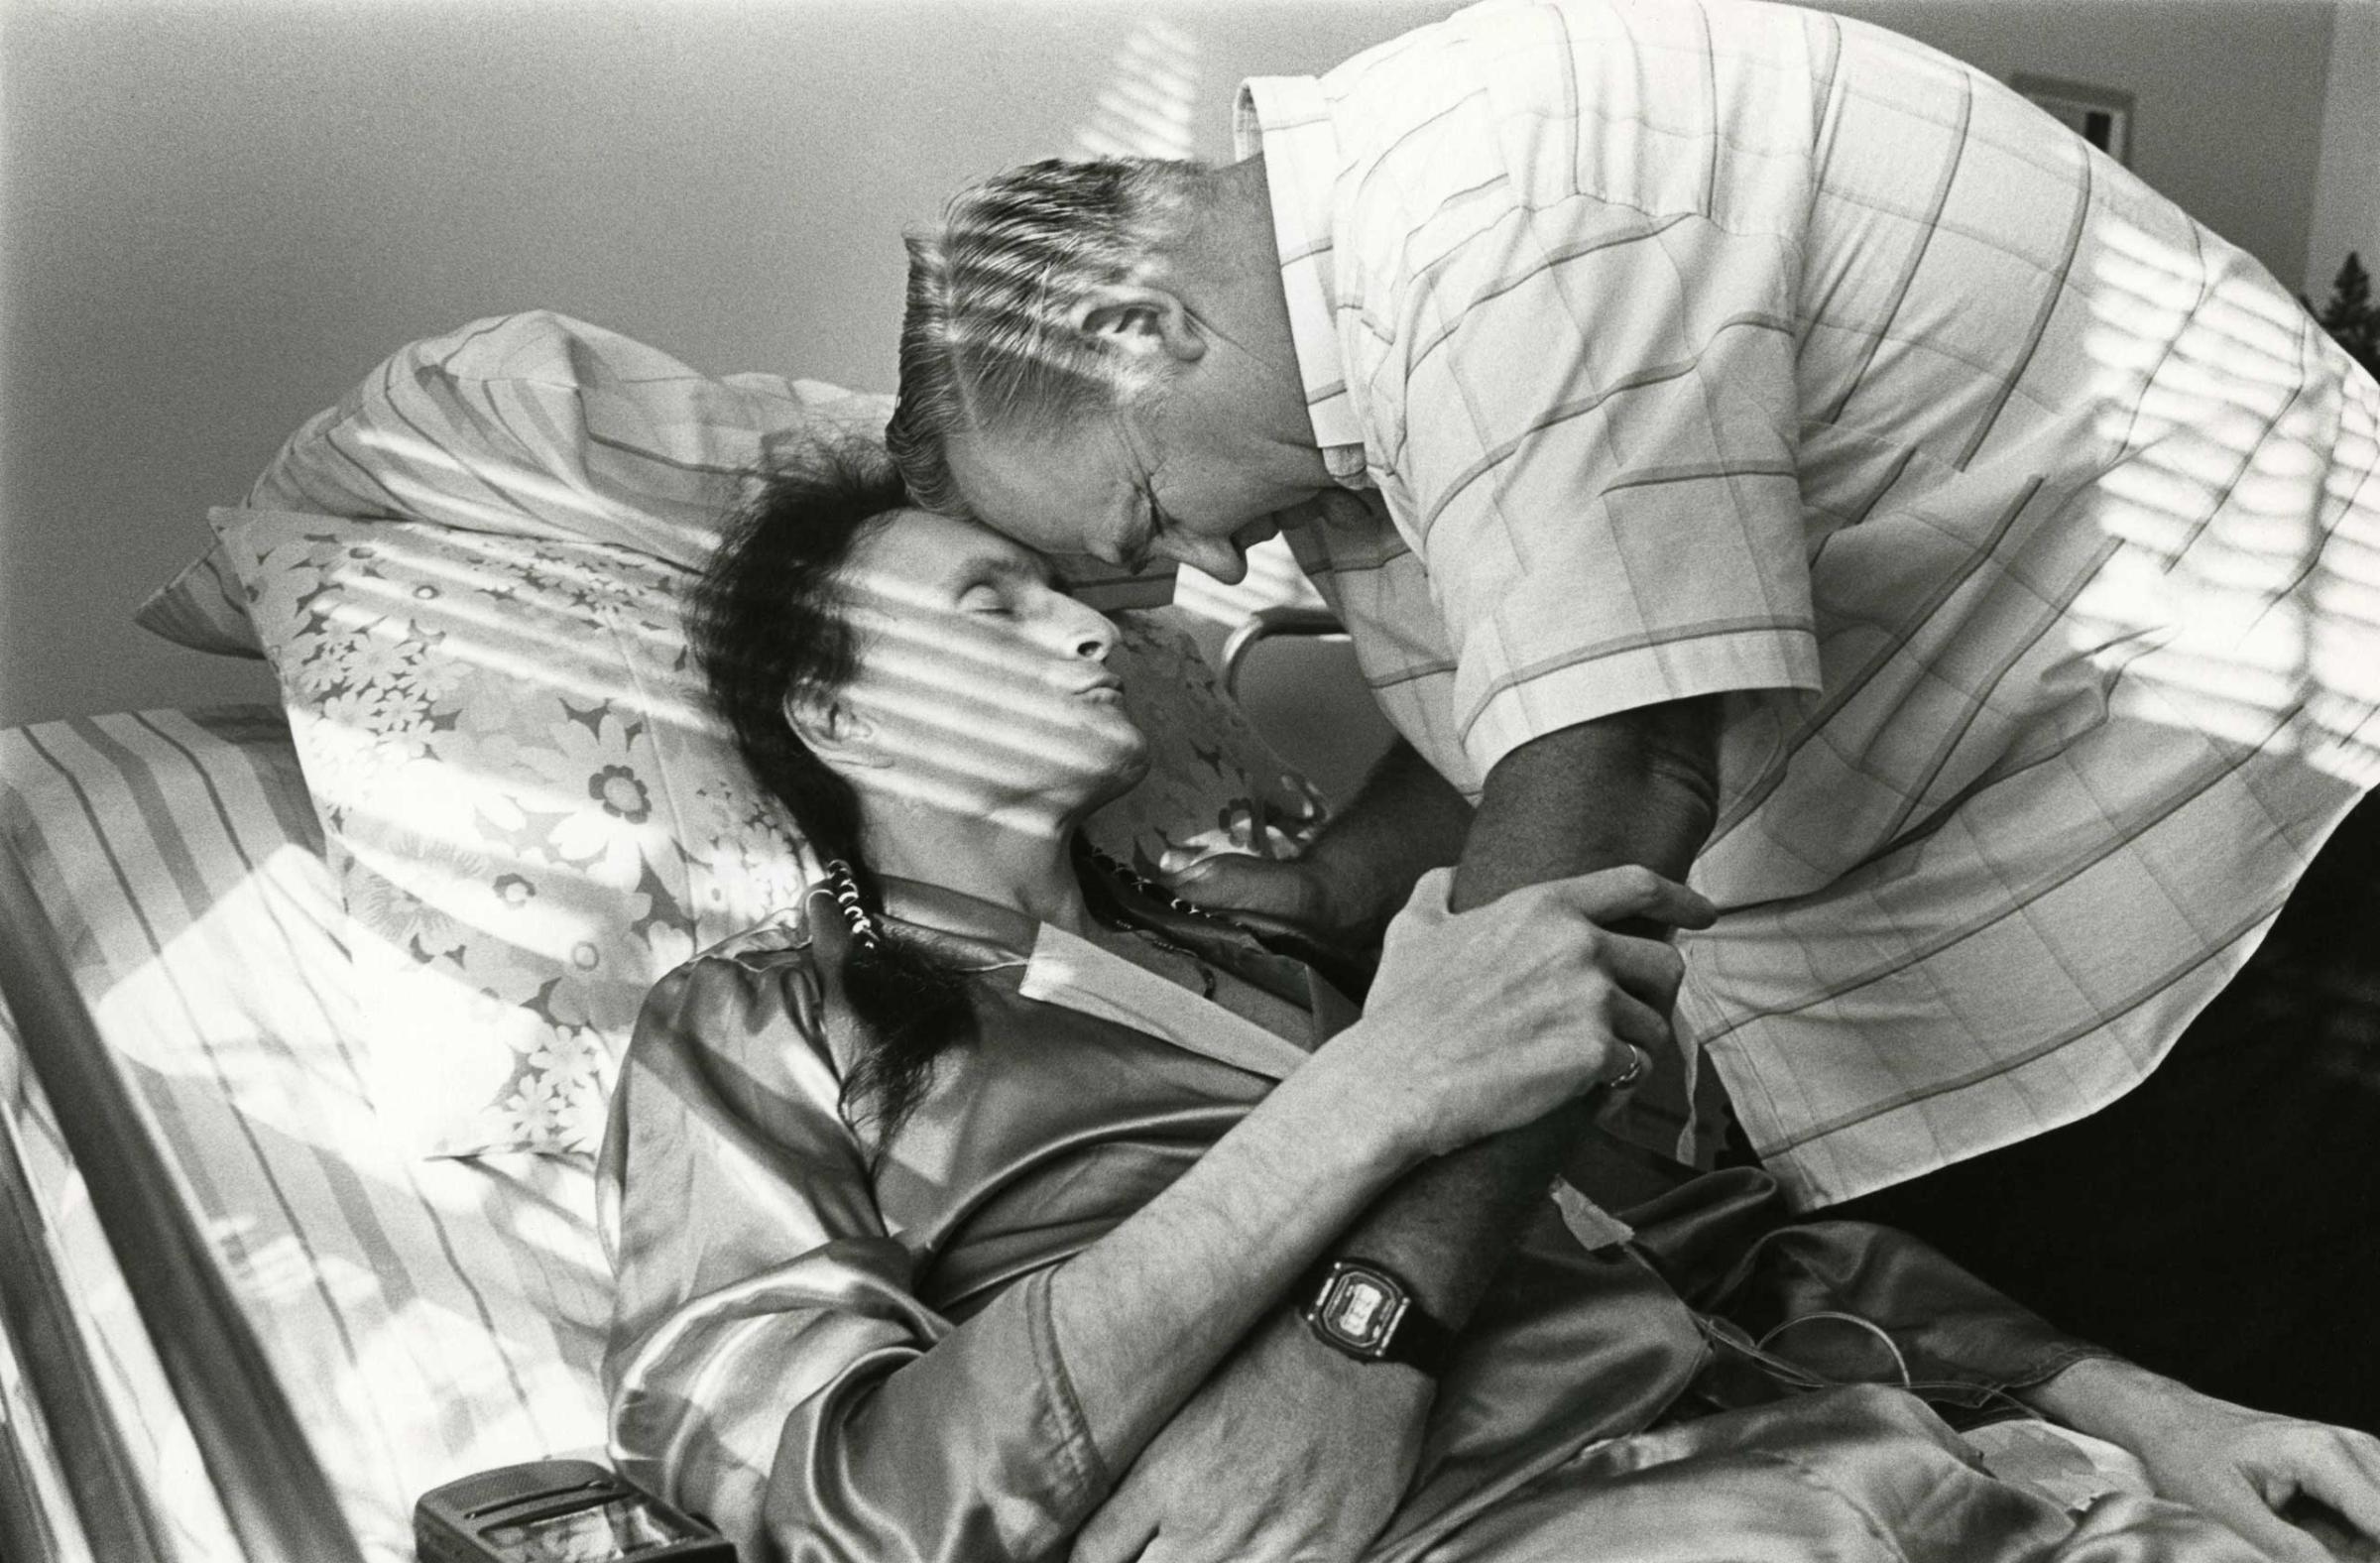 Peta and Bill Kirby share a quiet moment together in Peta's room, Ohio, 1992.